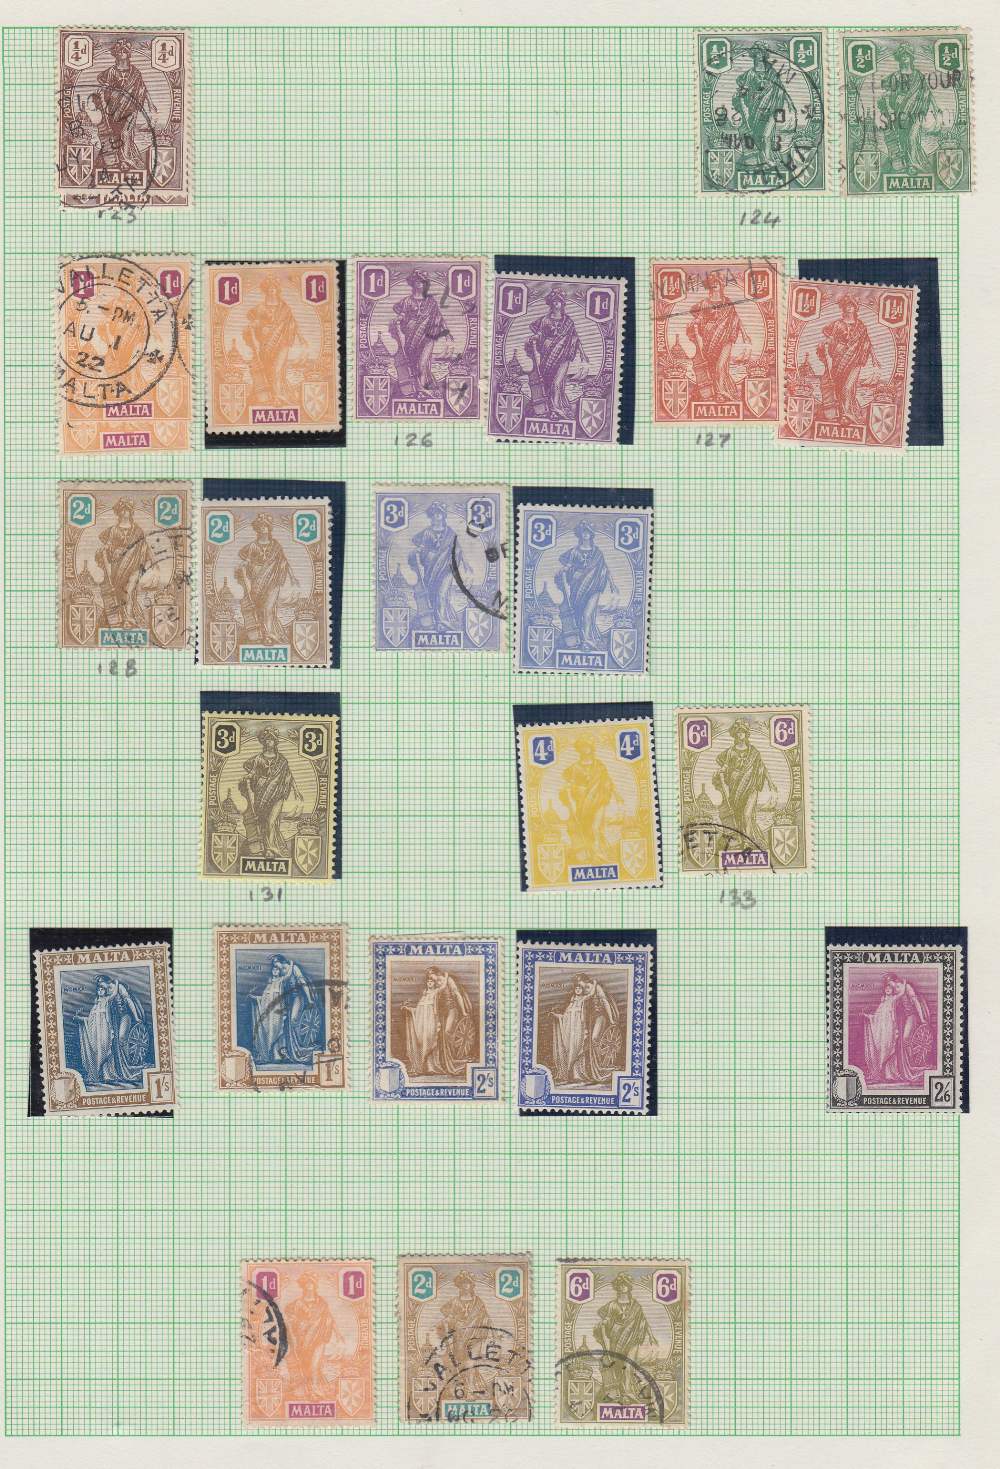 STAMSP MALTA Collection in album, also on a few stockcards.